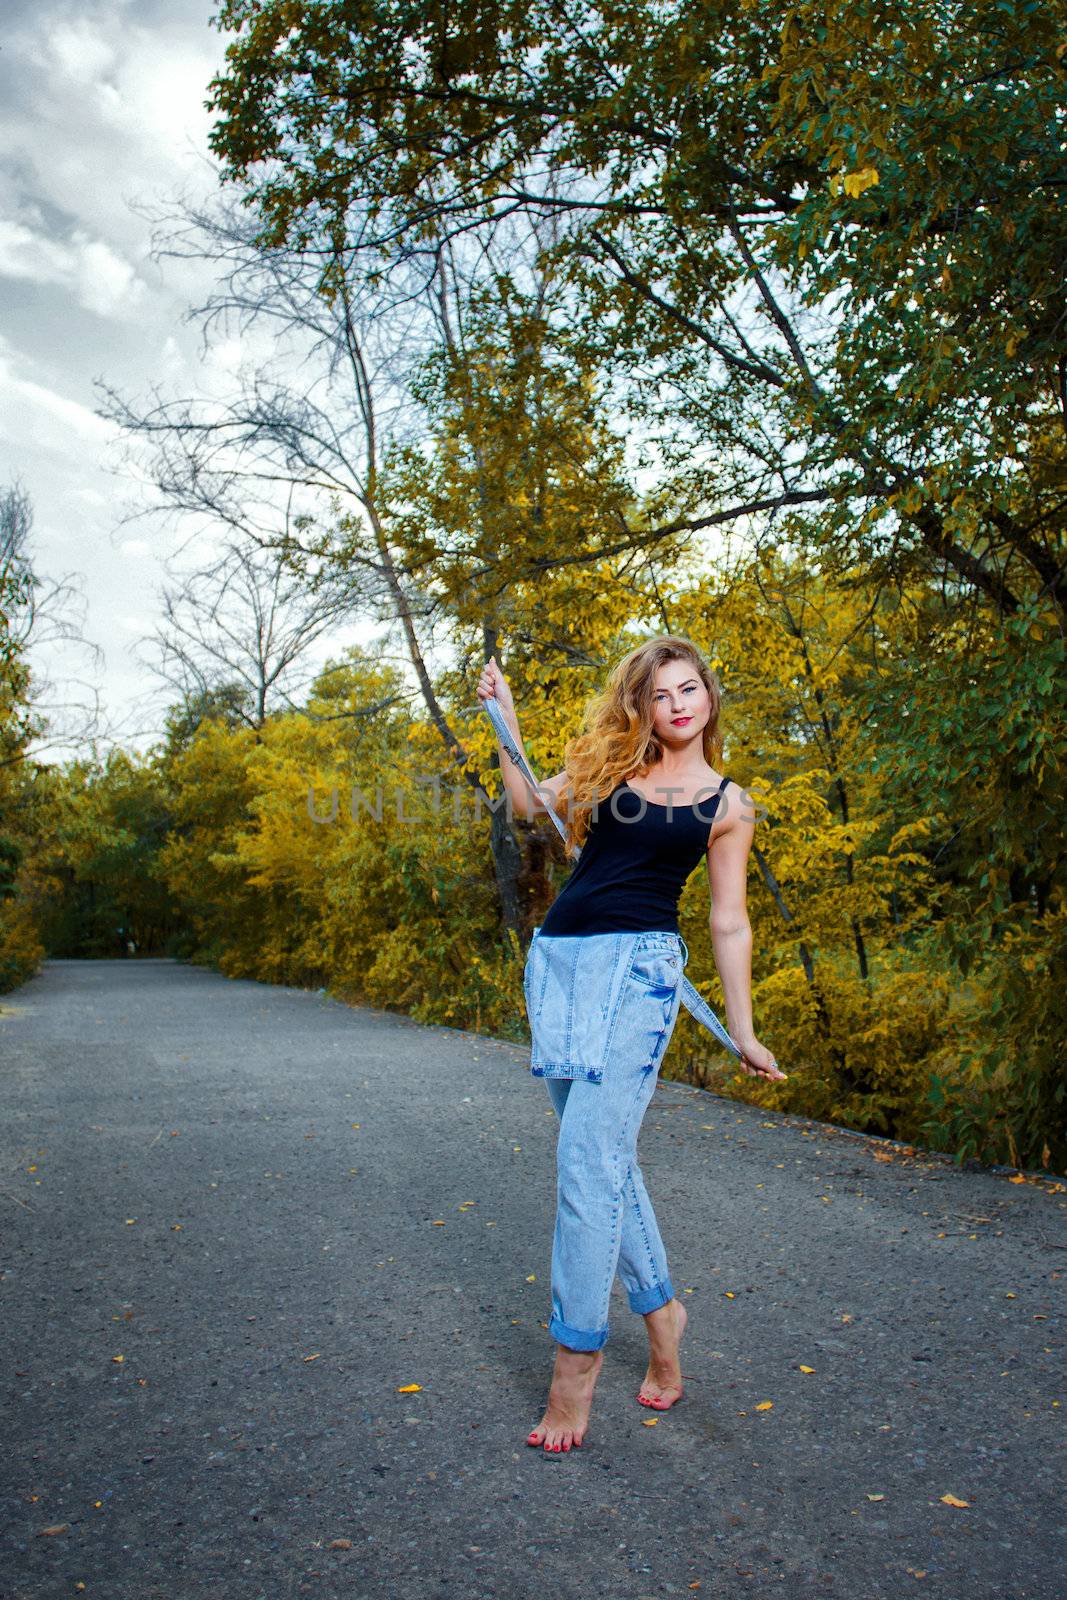 Beautiful pin-up girl in denim overalls and a T-shirt outdoors